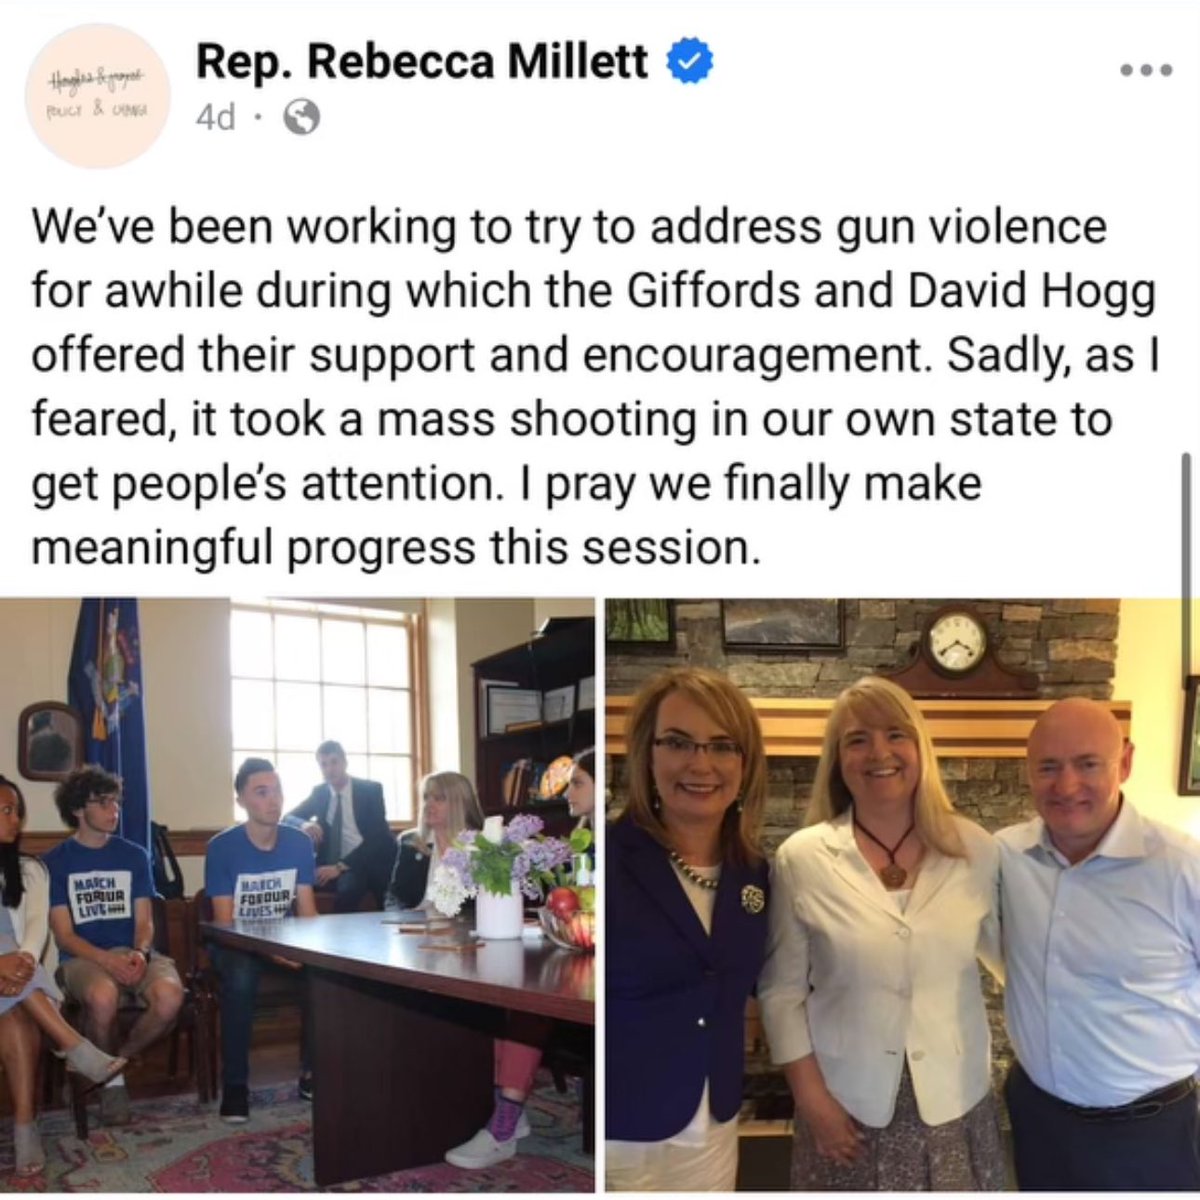 I still feel guity about those meetings in 2019. Maine Democrats had the legislature and did next to nothing on guns despite the students of MFOL explaining the dangers of not passing a strong red flag law. Had Democrats listened Lewiston may have been prevented.